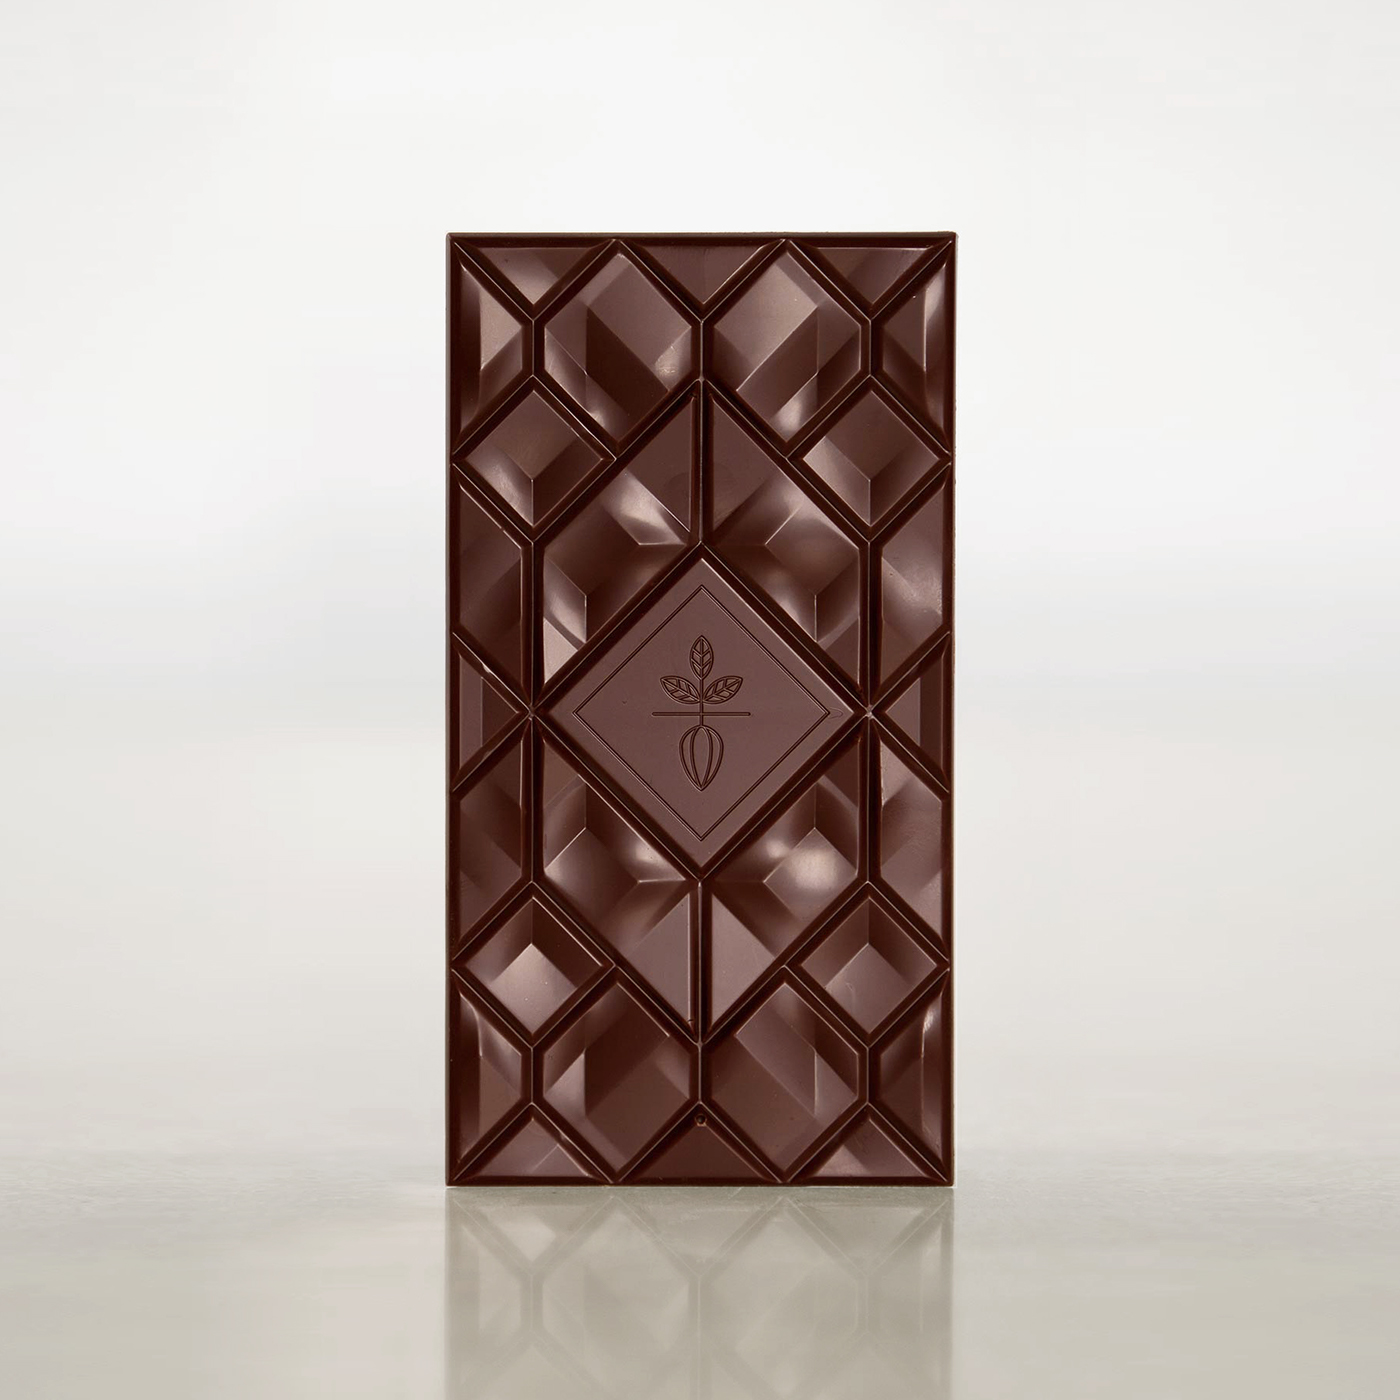 chocolate bar chocolate cacao Beau Cacao Mould Design Chocolate bar design product Packaging bean to bar handcrafted